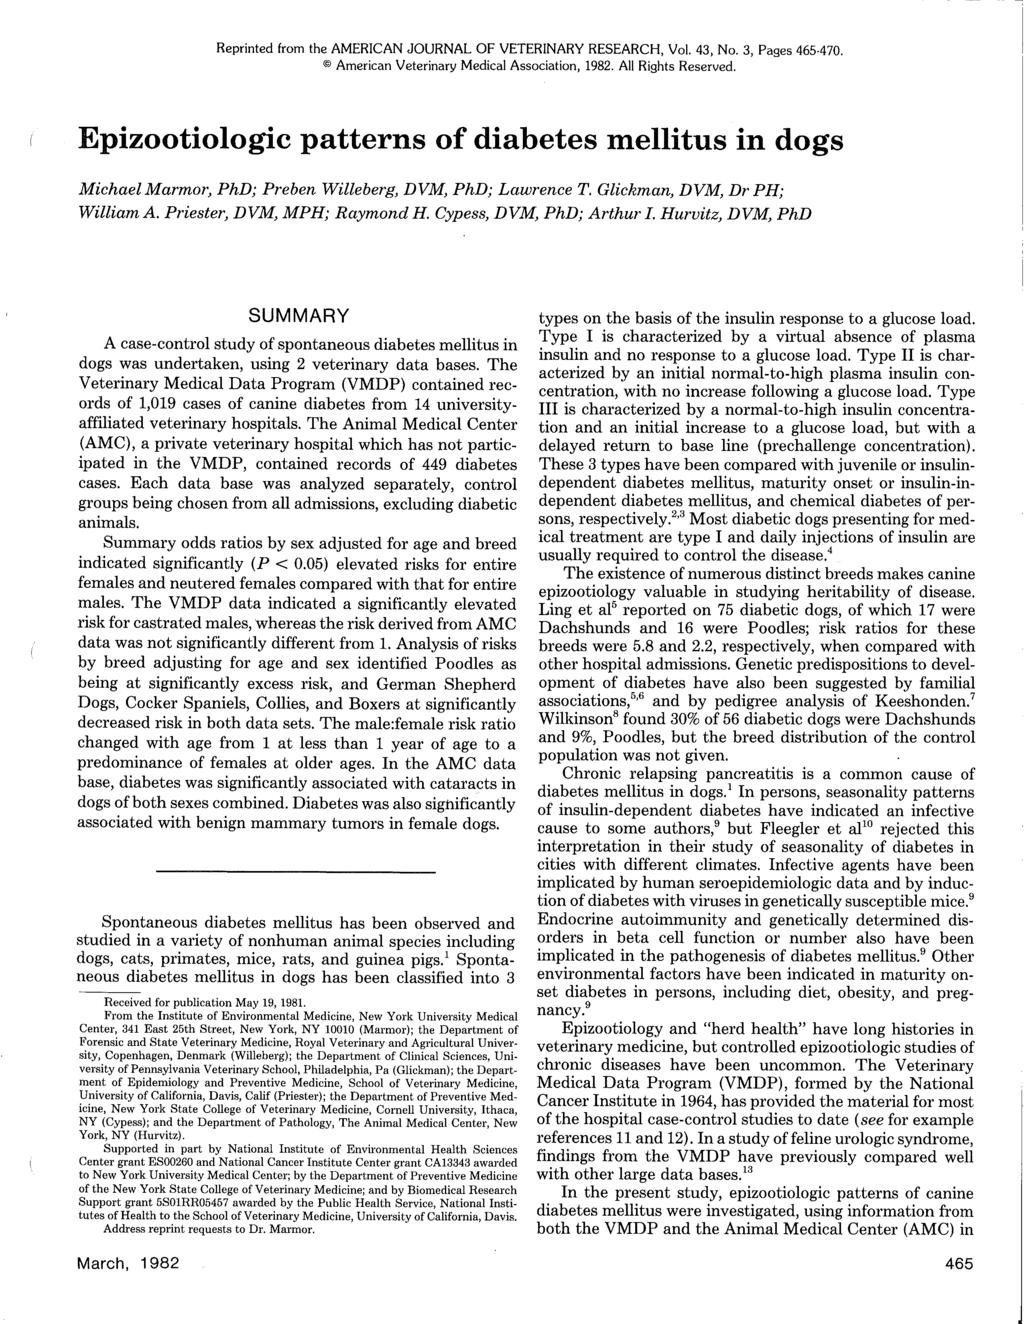 Reprinted from the AMERICAN JOURNAL OF VETERINARY RESEARCH, VoL 43, No. 3, Pages 465-470. American Veterinary Medical Association, 1982. All Rights Reserved.